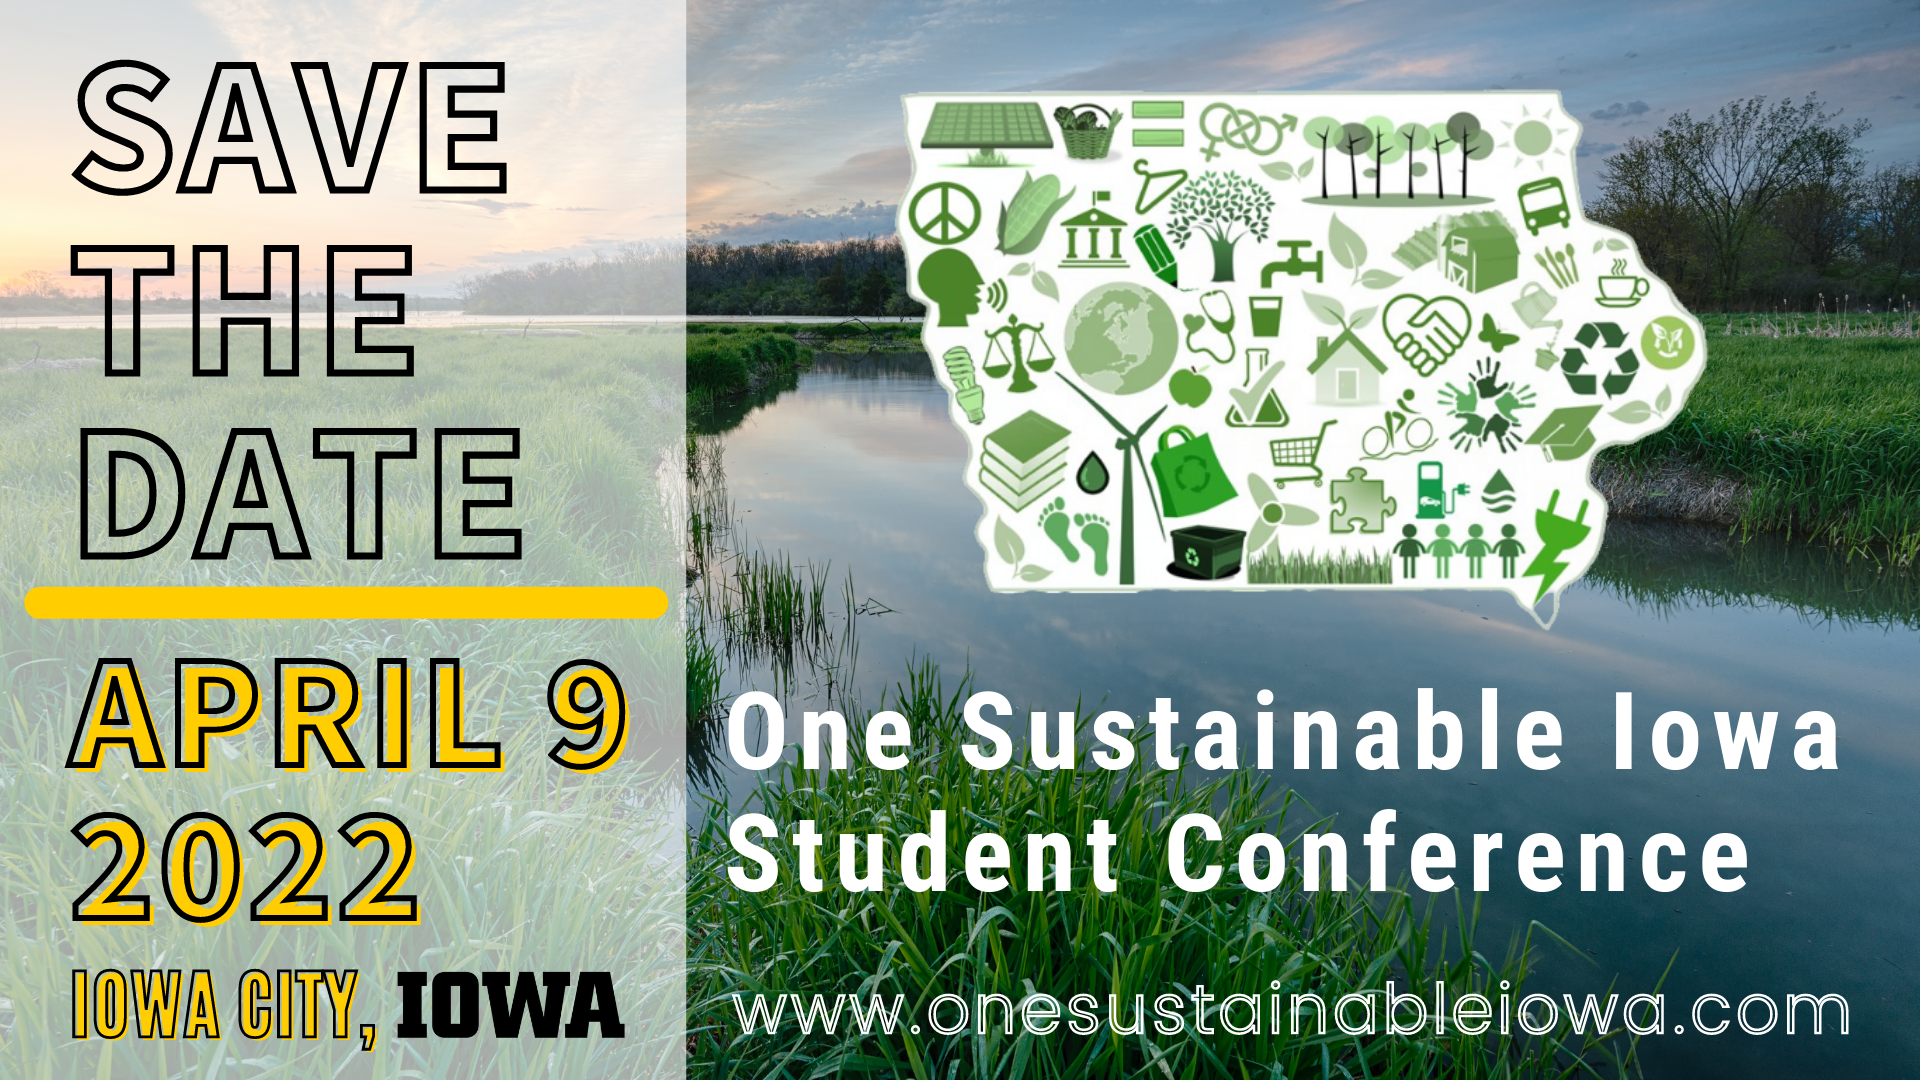 One Sustainable Iowa Student Conference: April 9, 2022